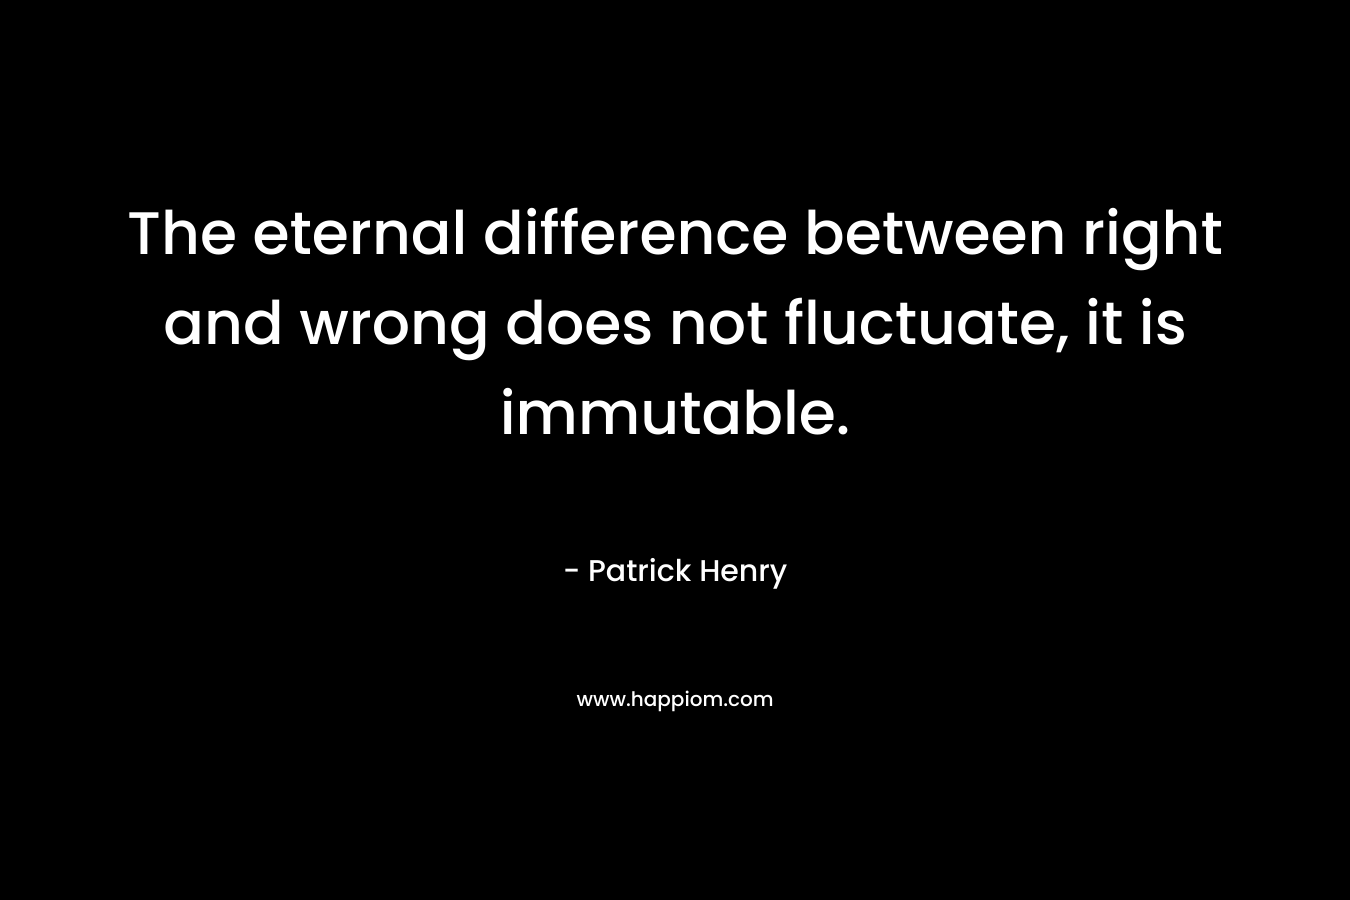 The eternal difference between right and wrong does not fluctuate, it is immutable.